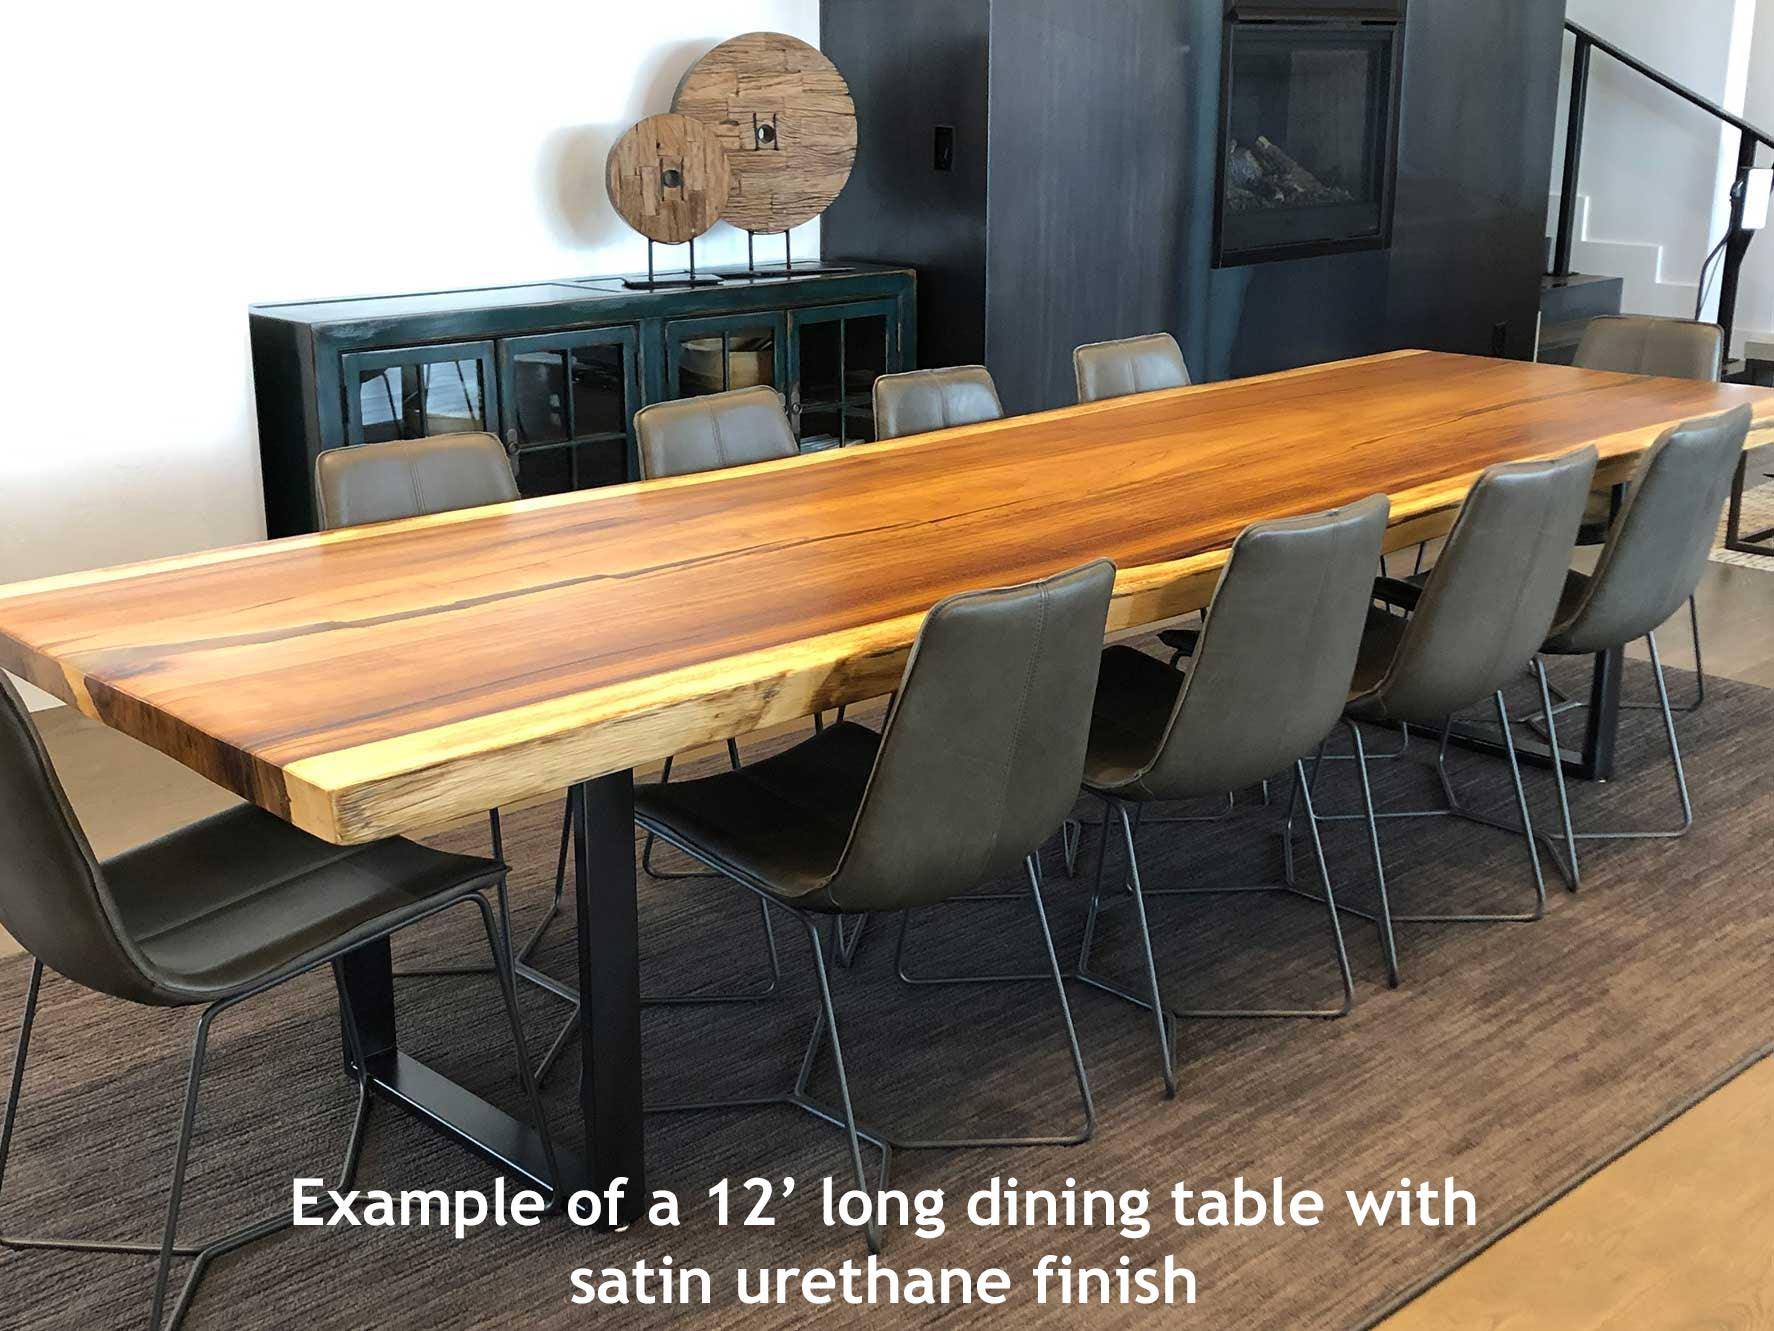 Natural Live Edge Kiln Dried Sustainably Harvested Wood Slab Table Top –  Impact Imports